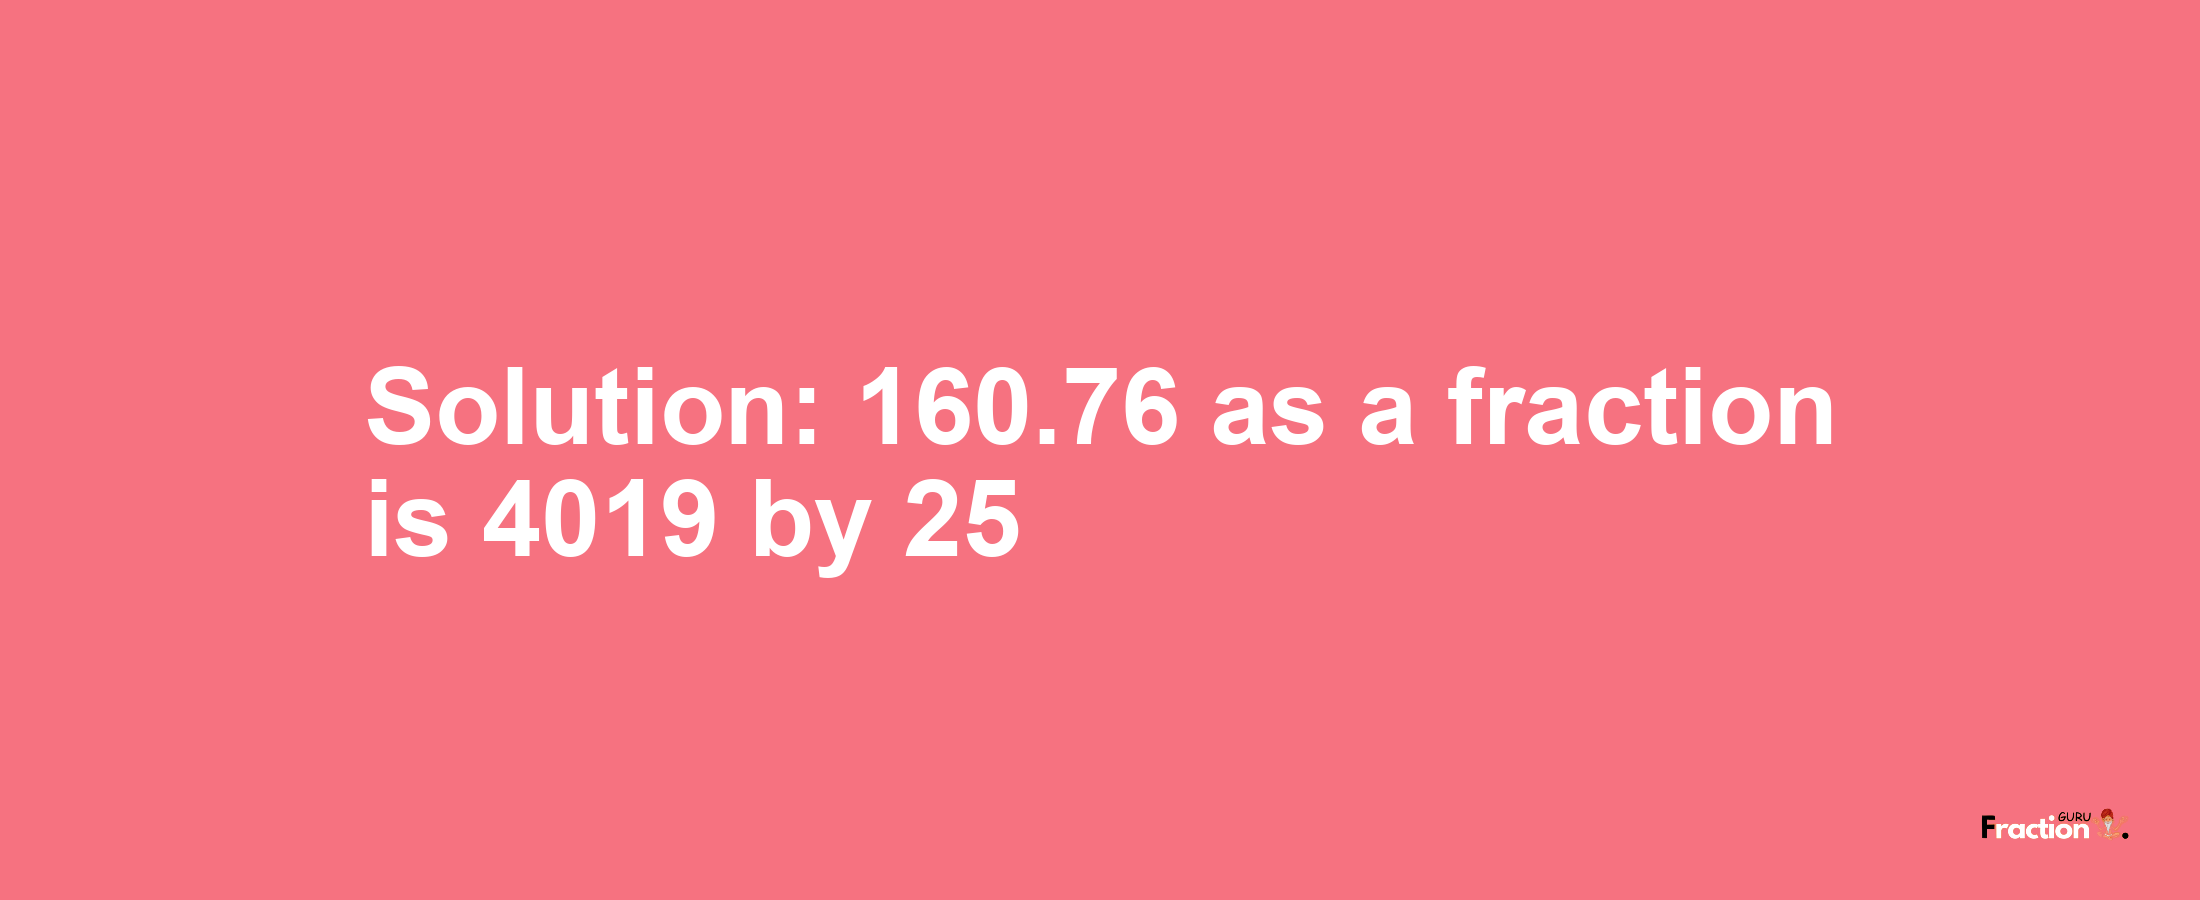 Solution:160.76 as a fraction is 4019/25